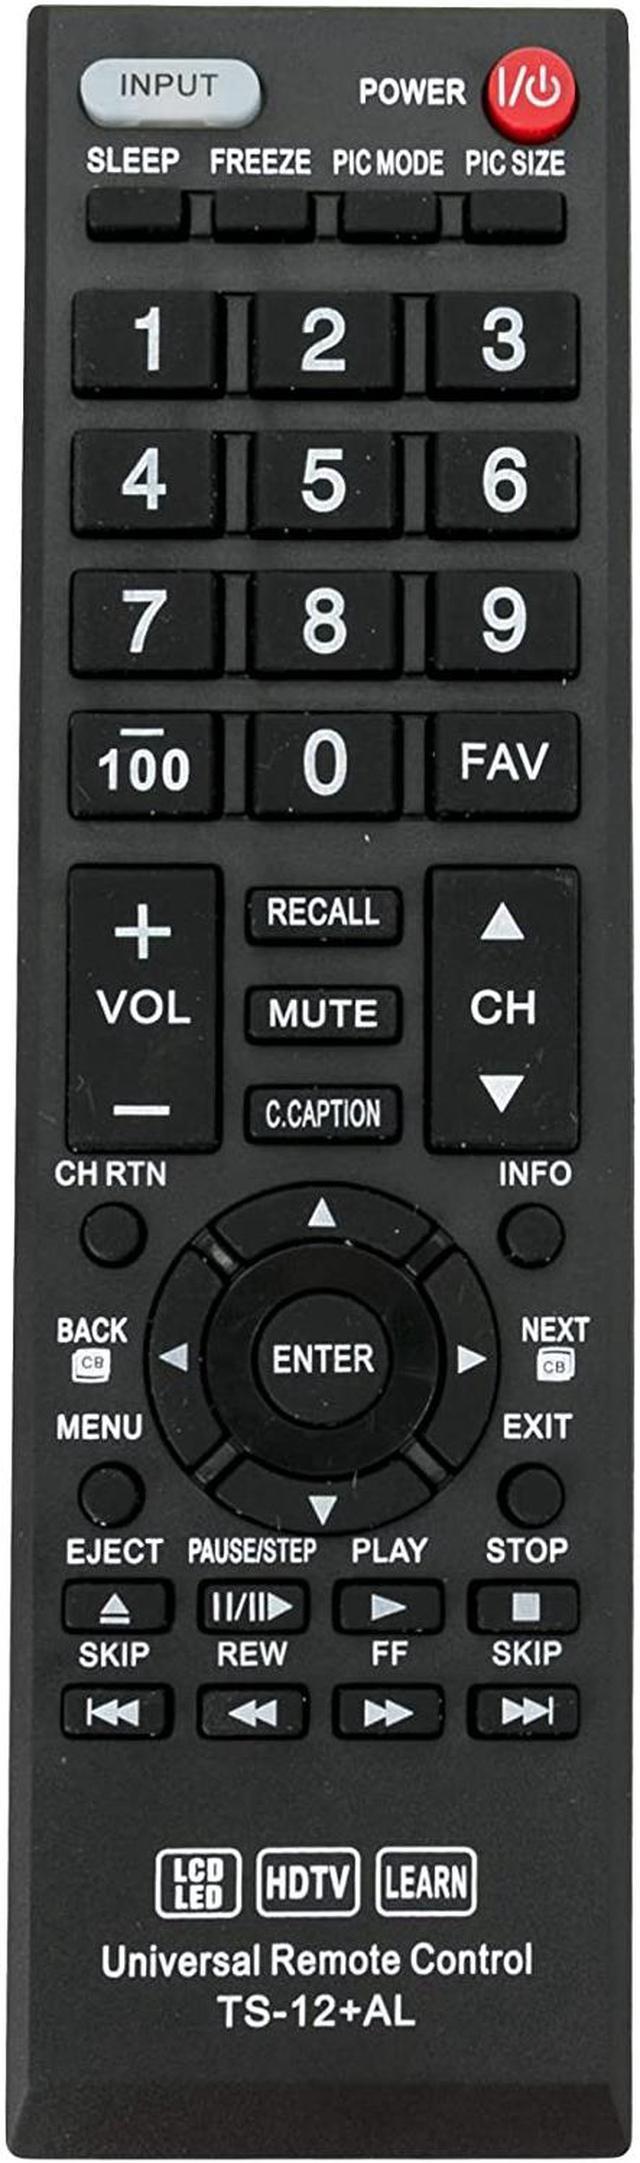 Universal Replacement Remote Control TS-12+AL for Almost All Toshiba TV,  Smart TV,CT-90326 CT-90302 CT-90275 CT-90 CT-90366 CT-90325 CT-90329 CT-8037